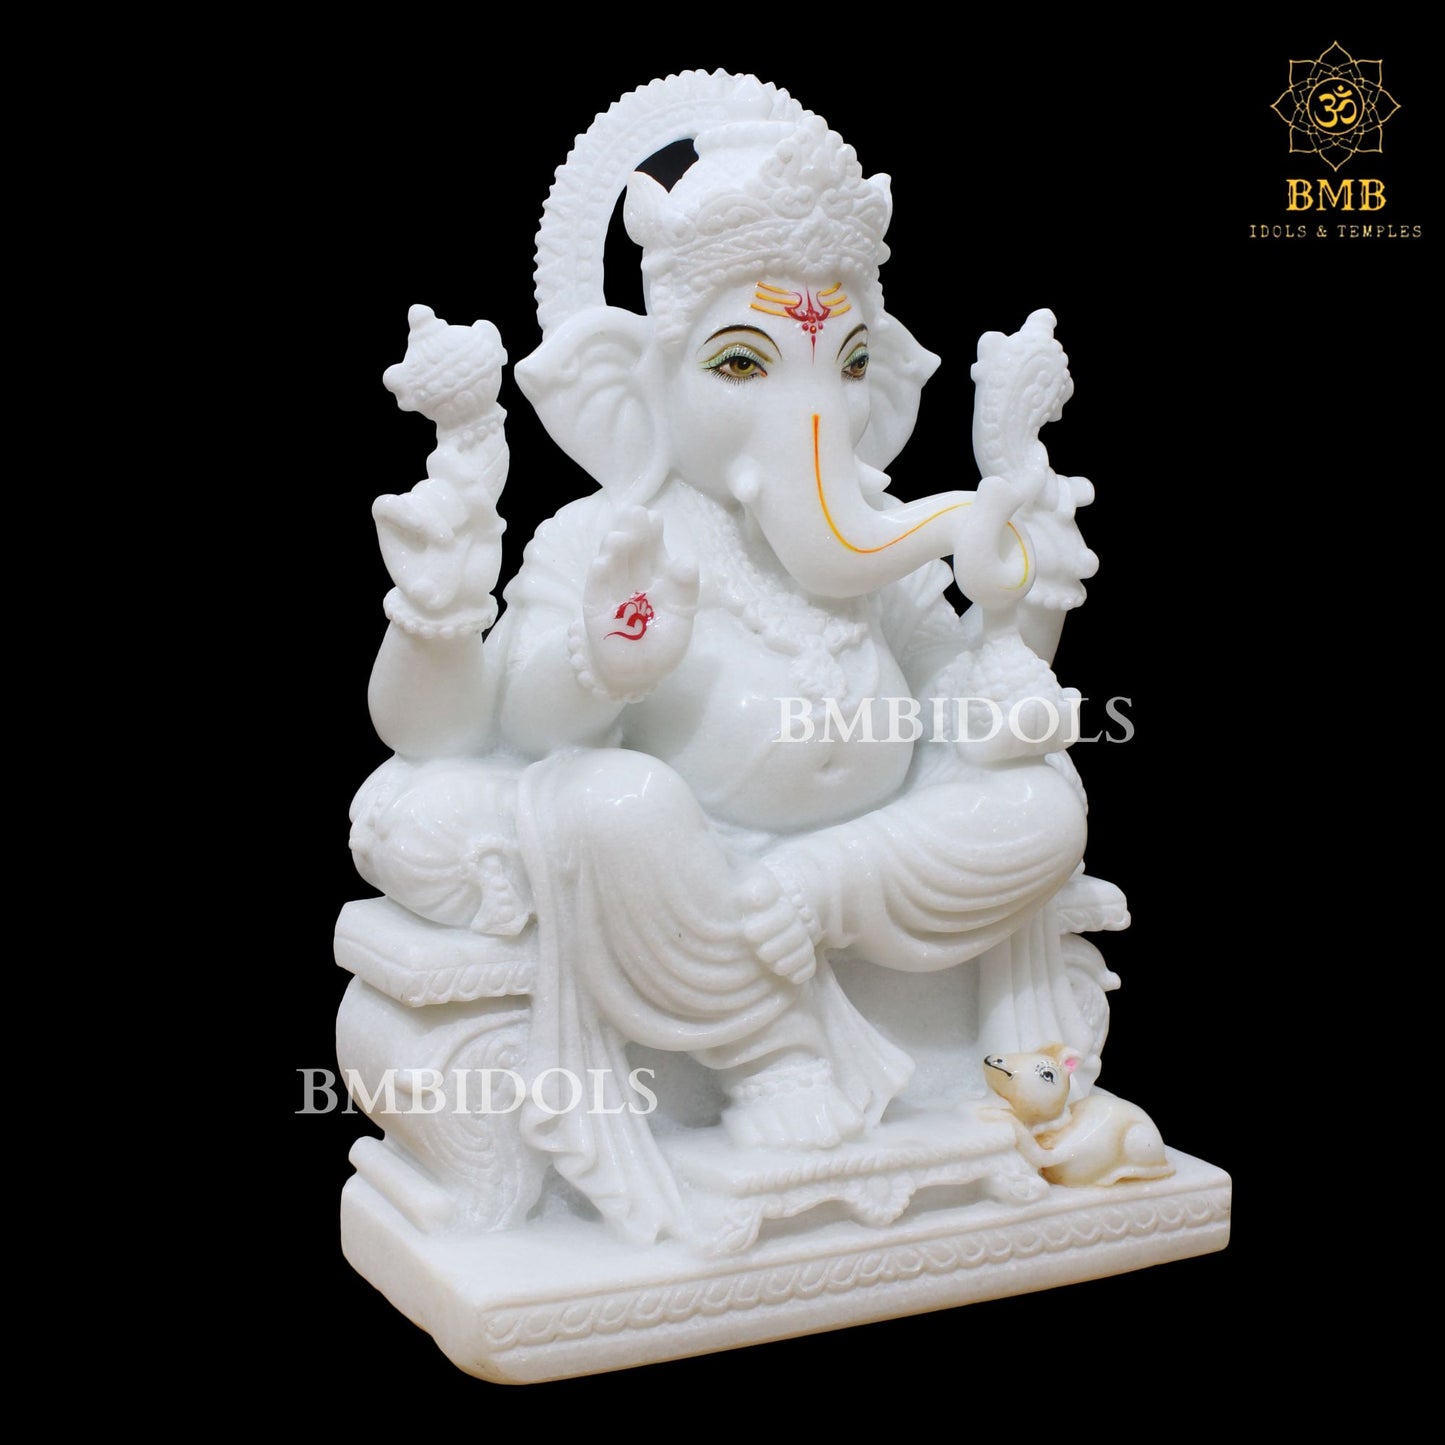 Marble Ganesh Statue made in 18inches for Homes and Temples, Ganpati Murti